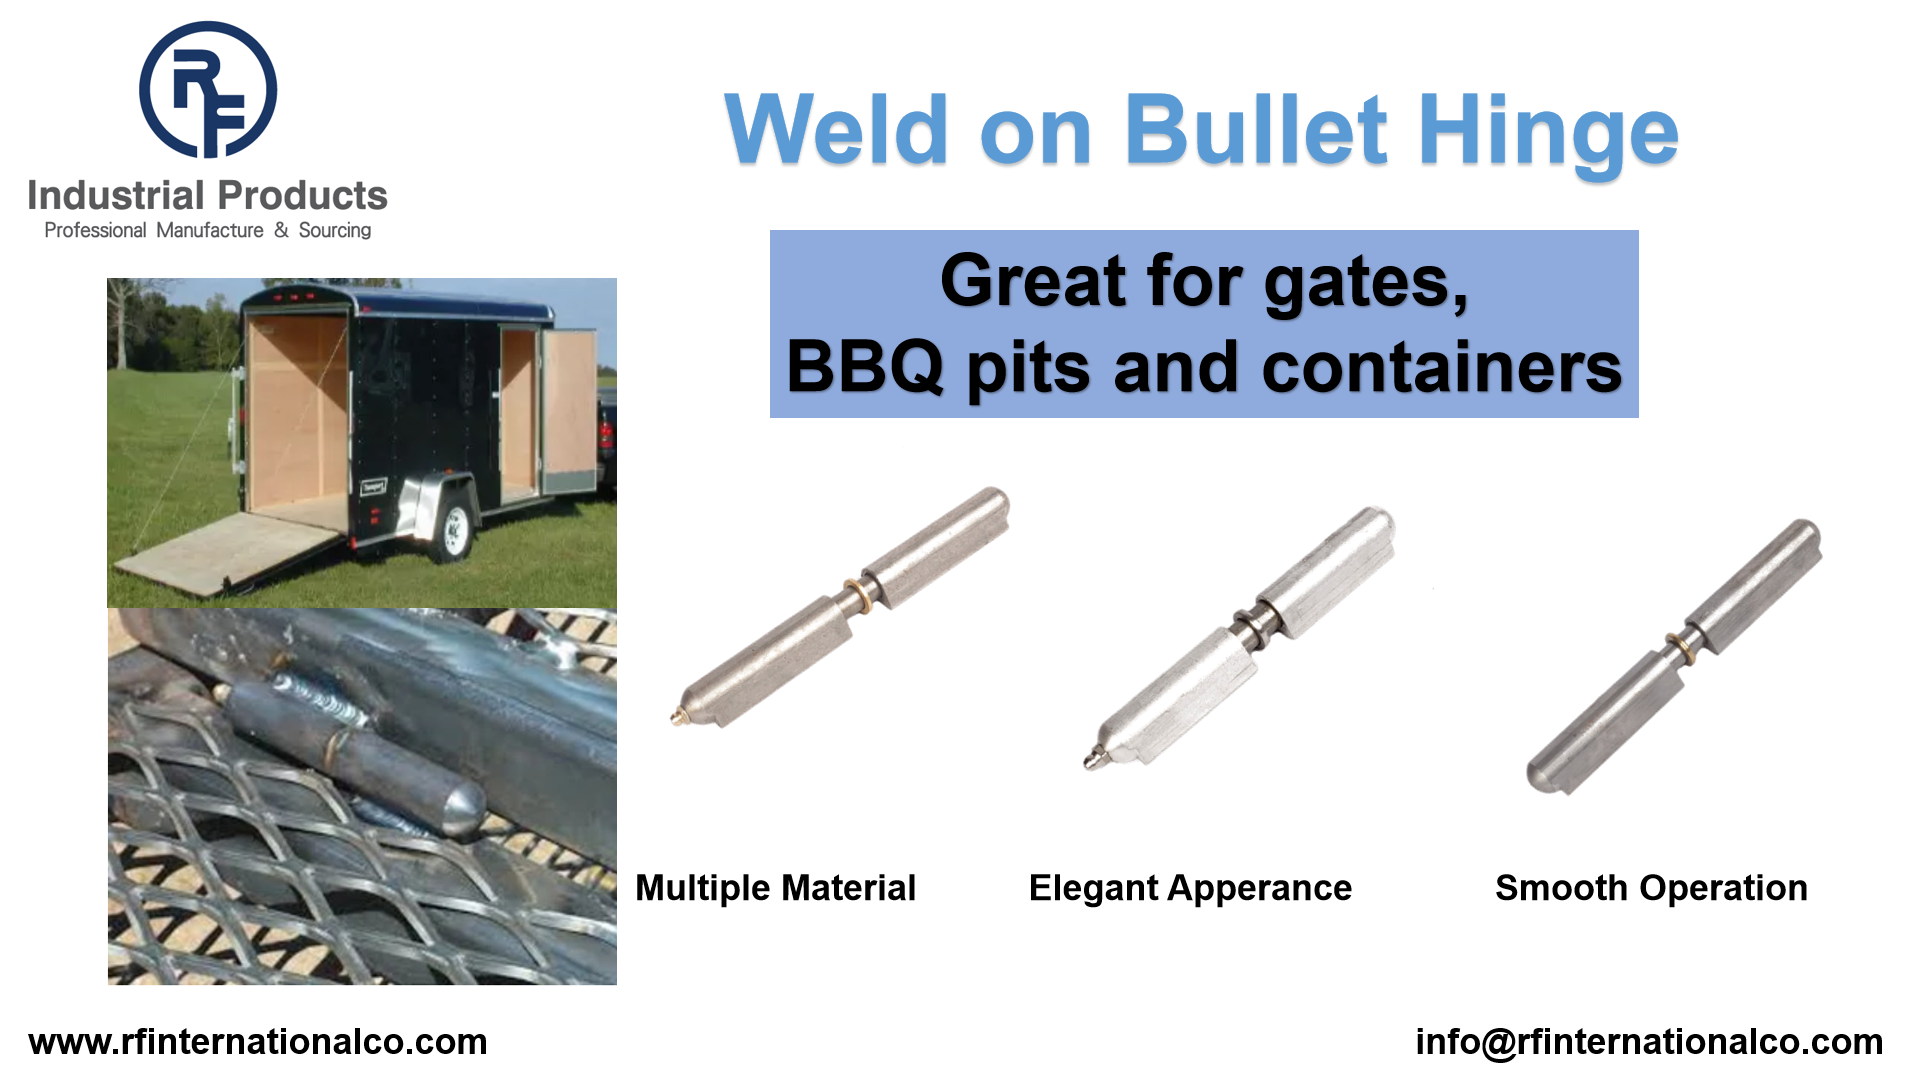 What Are The Uses Of The Bullet Hinge